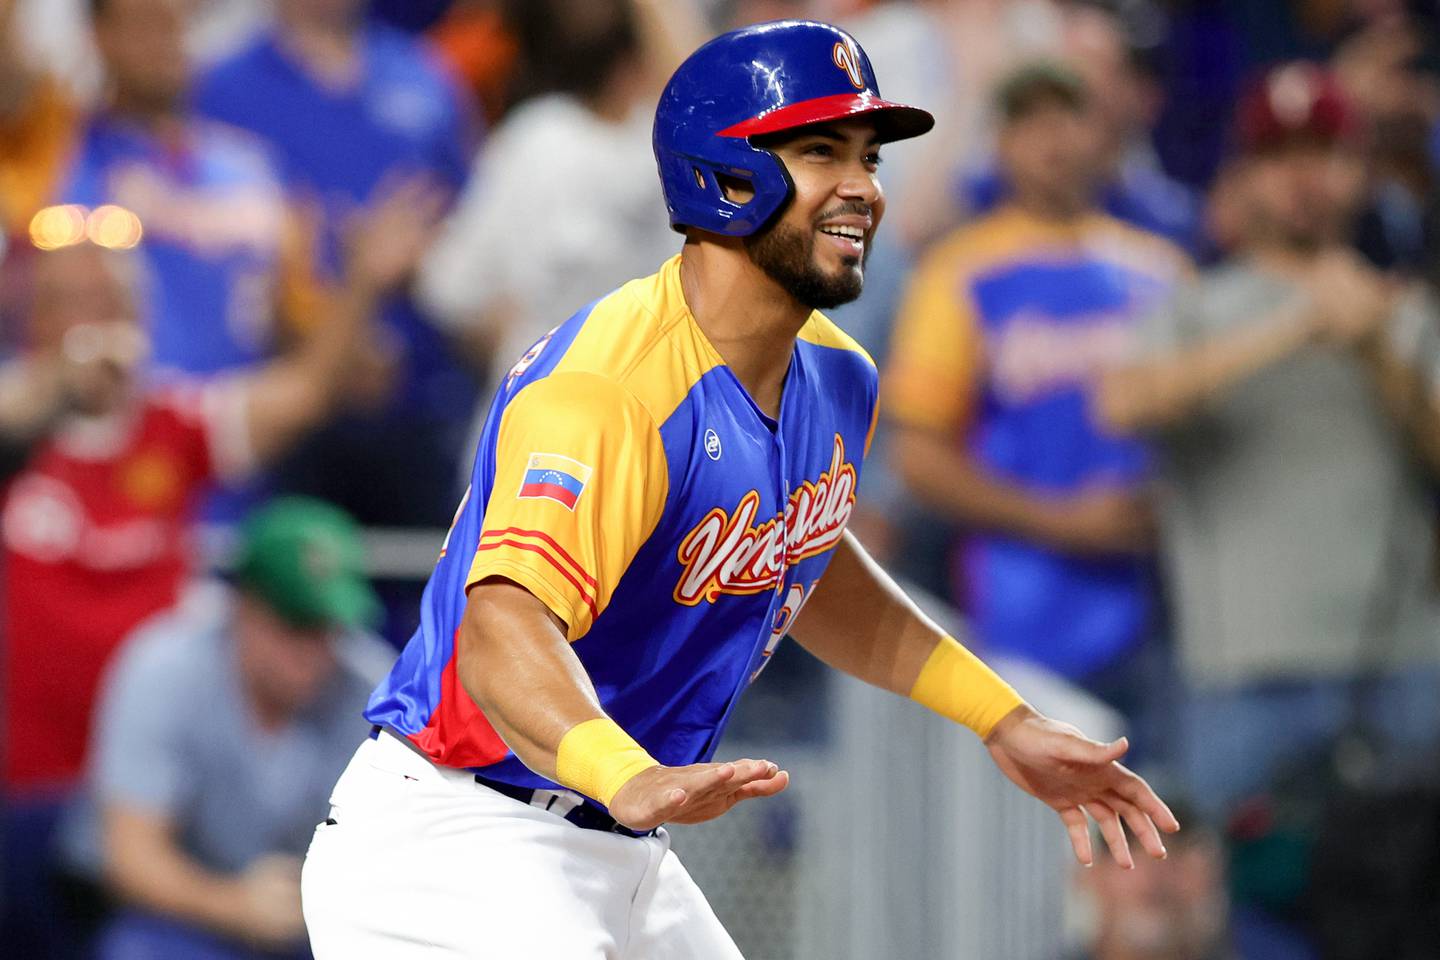 MIAMI, FLORIDA - MARCH 14: Anthony Santander #25 of Team Venezuela celebrates after scoring a run against Team Nicaragua during the fourth inning in a World Baseball Classic Pool D game at loanDepot park on March 14, 2023 in Miami, Florida.